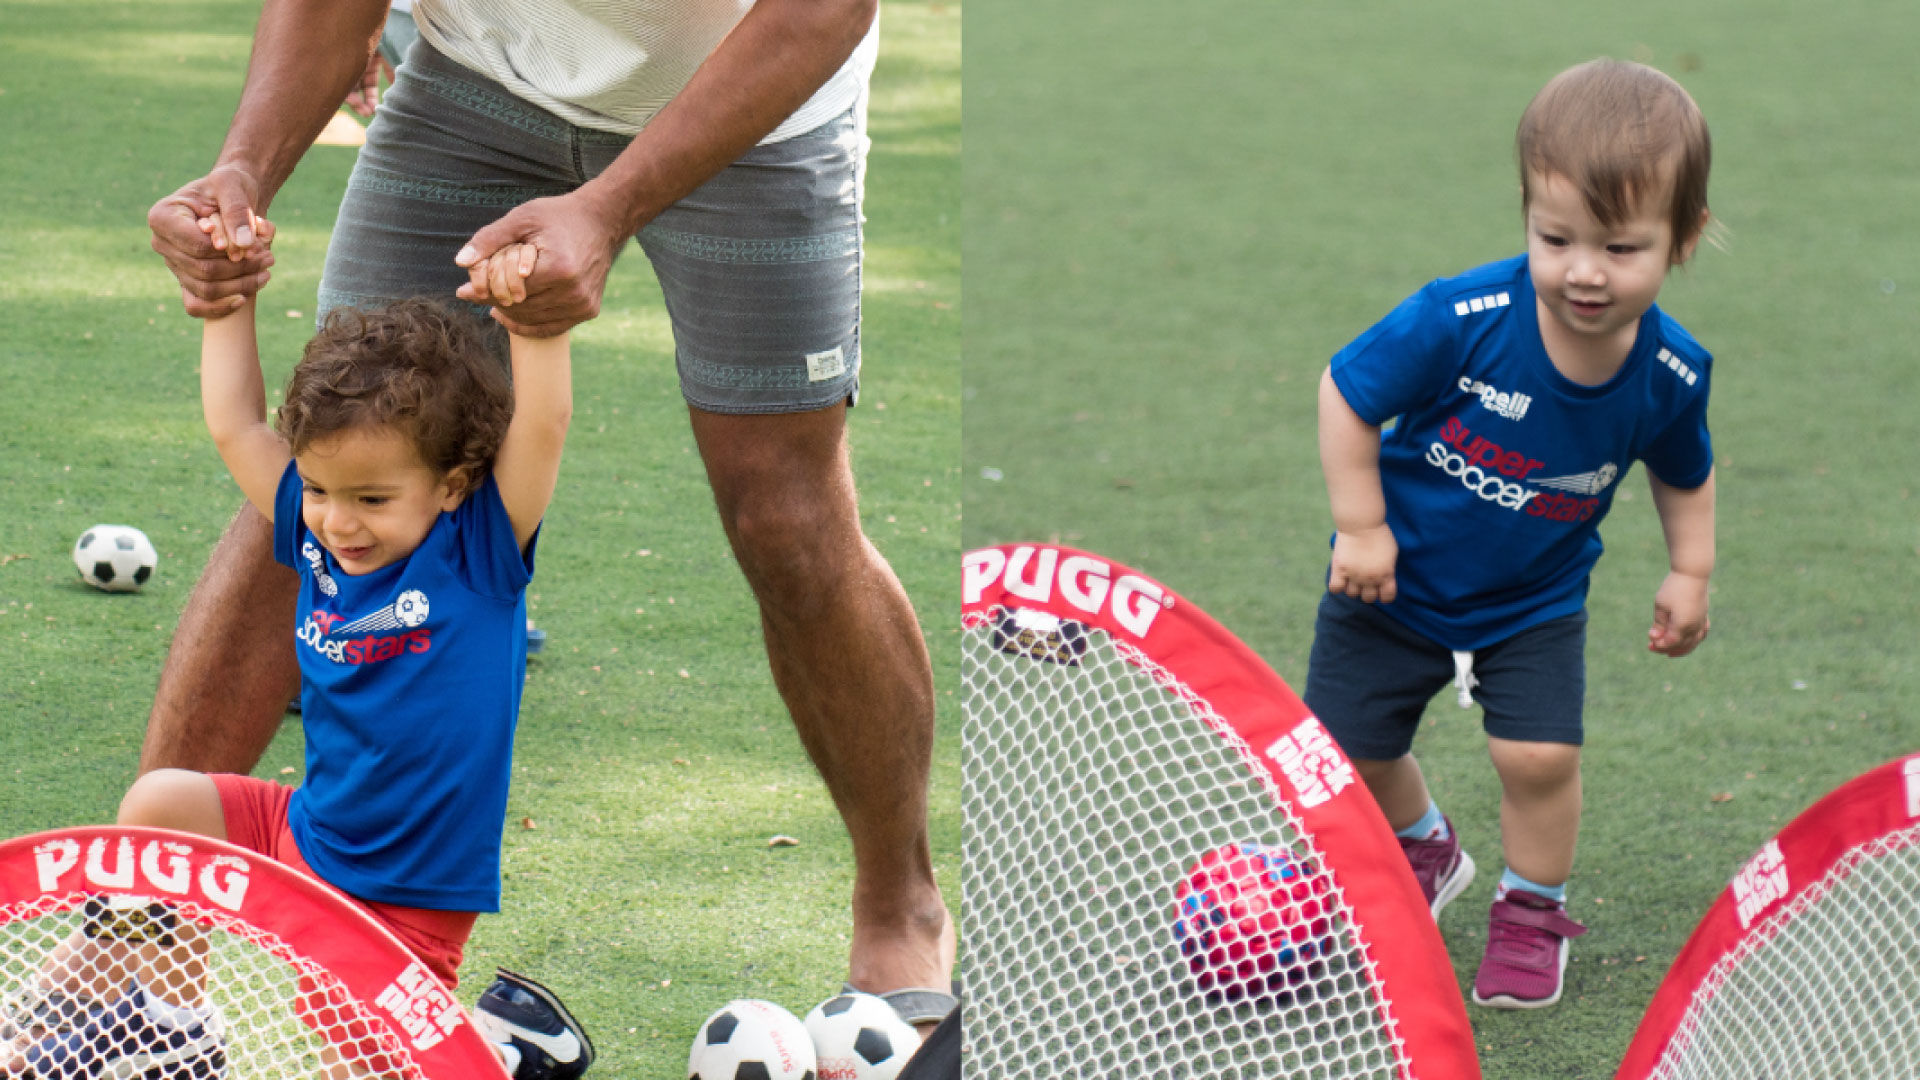 Pro Soccer Kids – Long Island & NYC Soccer Classes for Kids Age 2 to 11